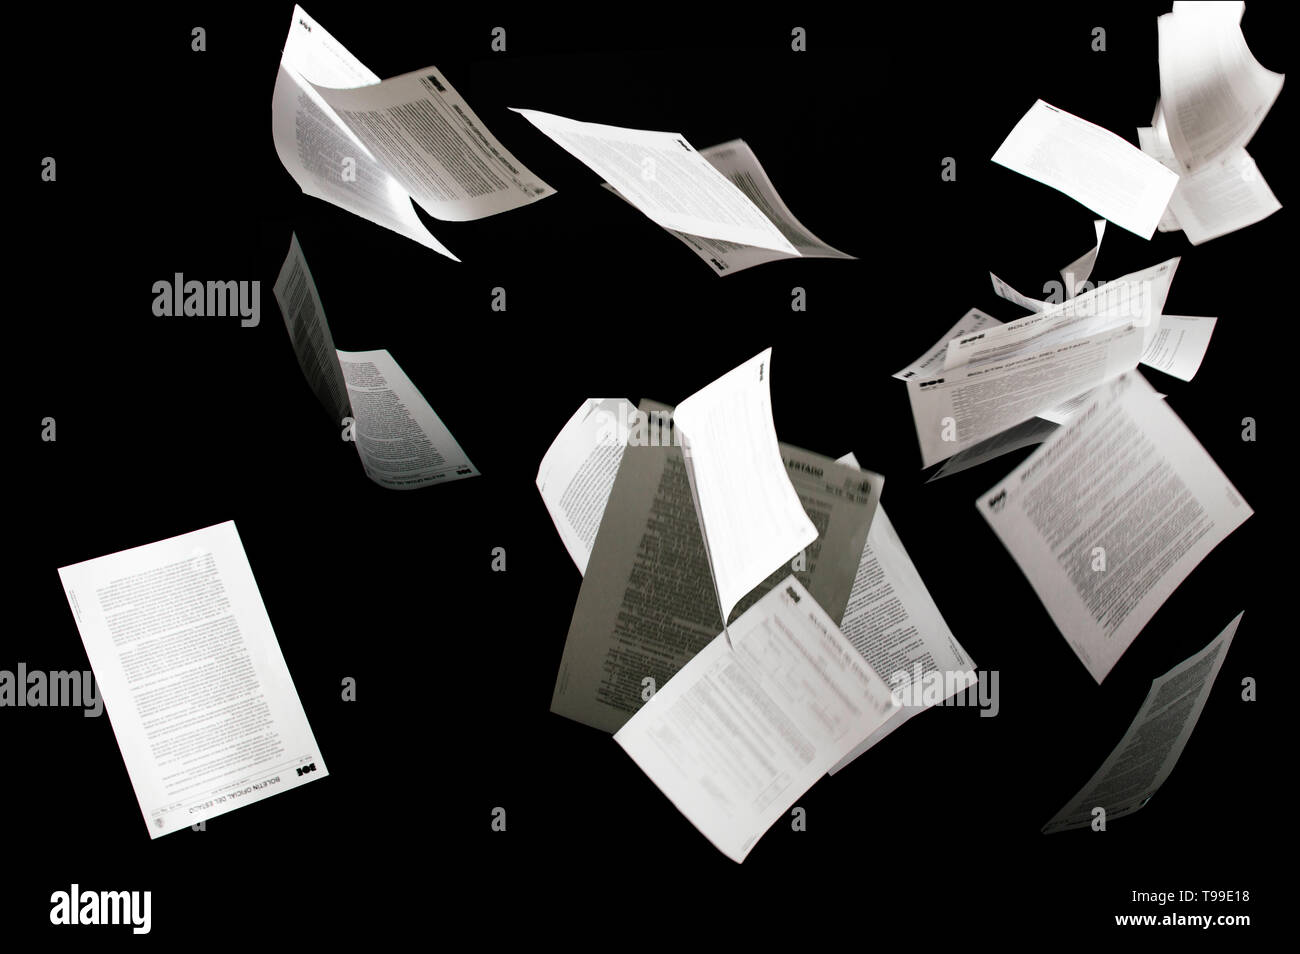 Many flying business documents isolated on black background. Papers flying in air in business concept Stock Photo